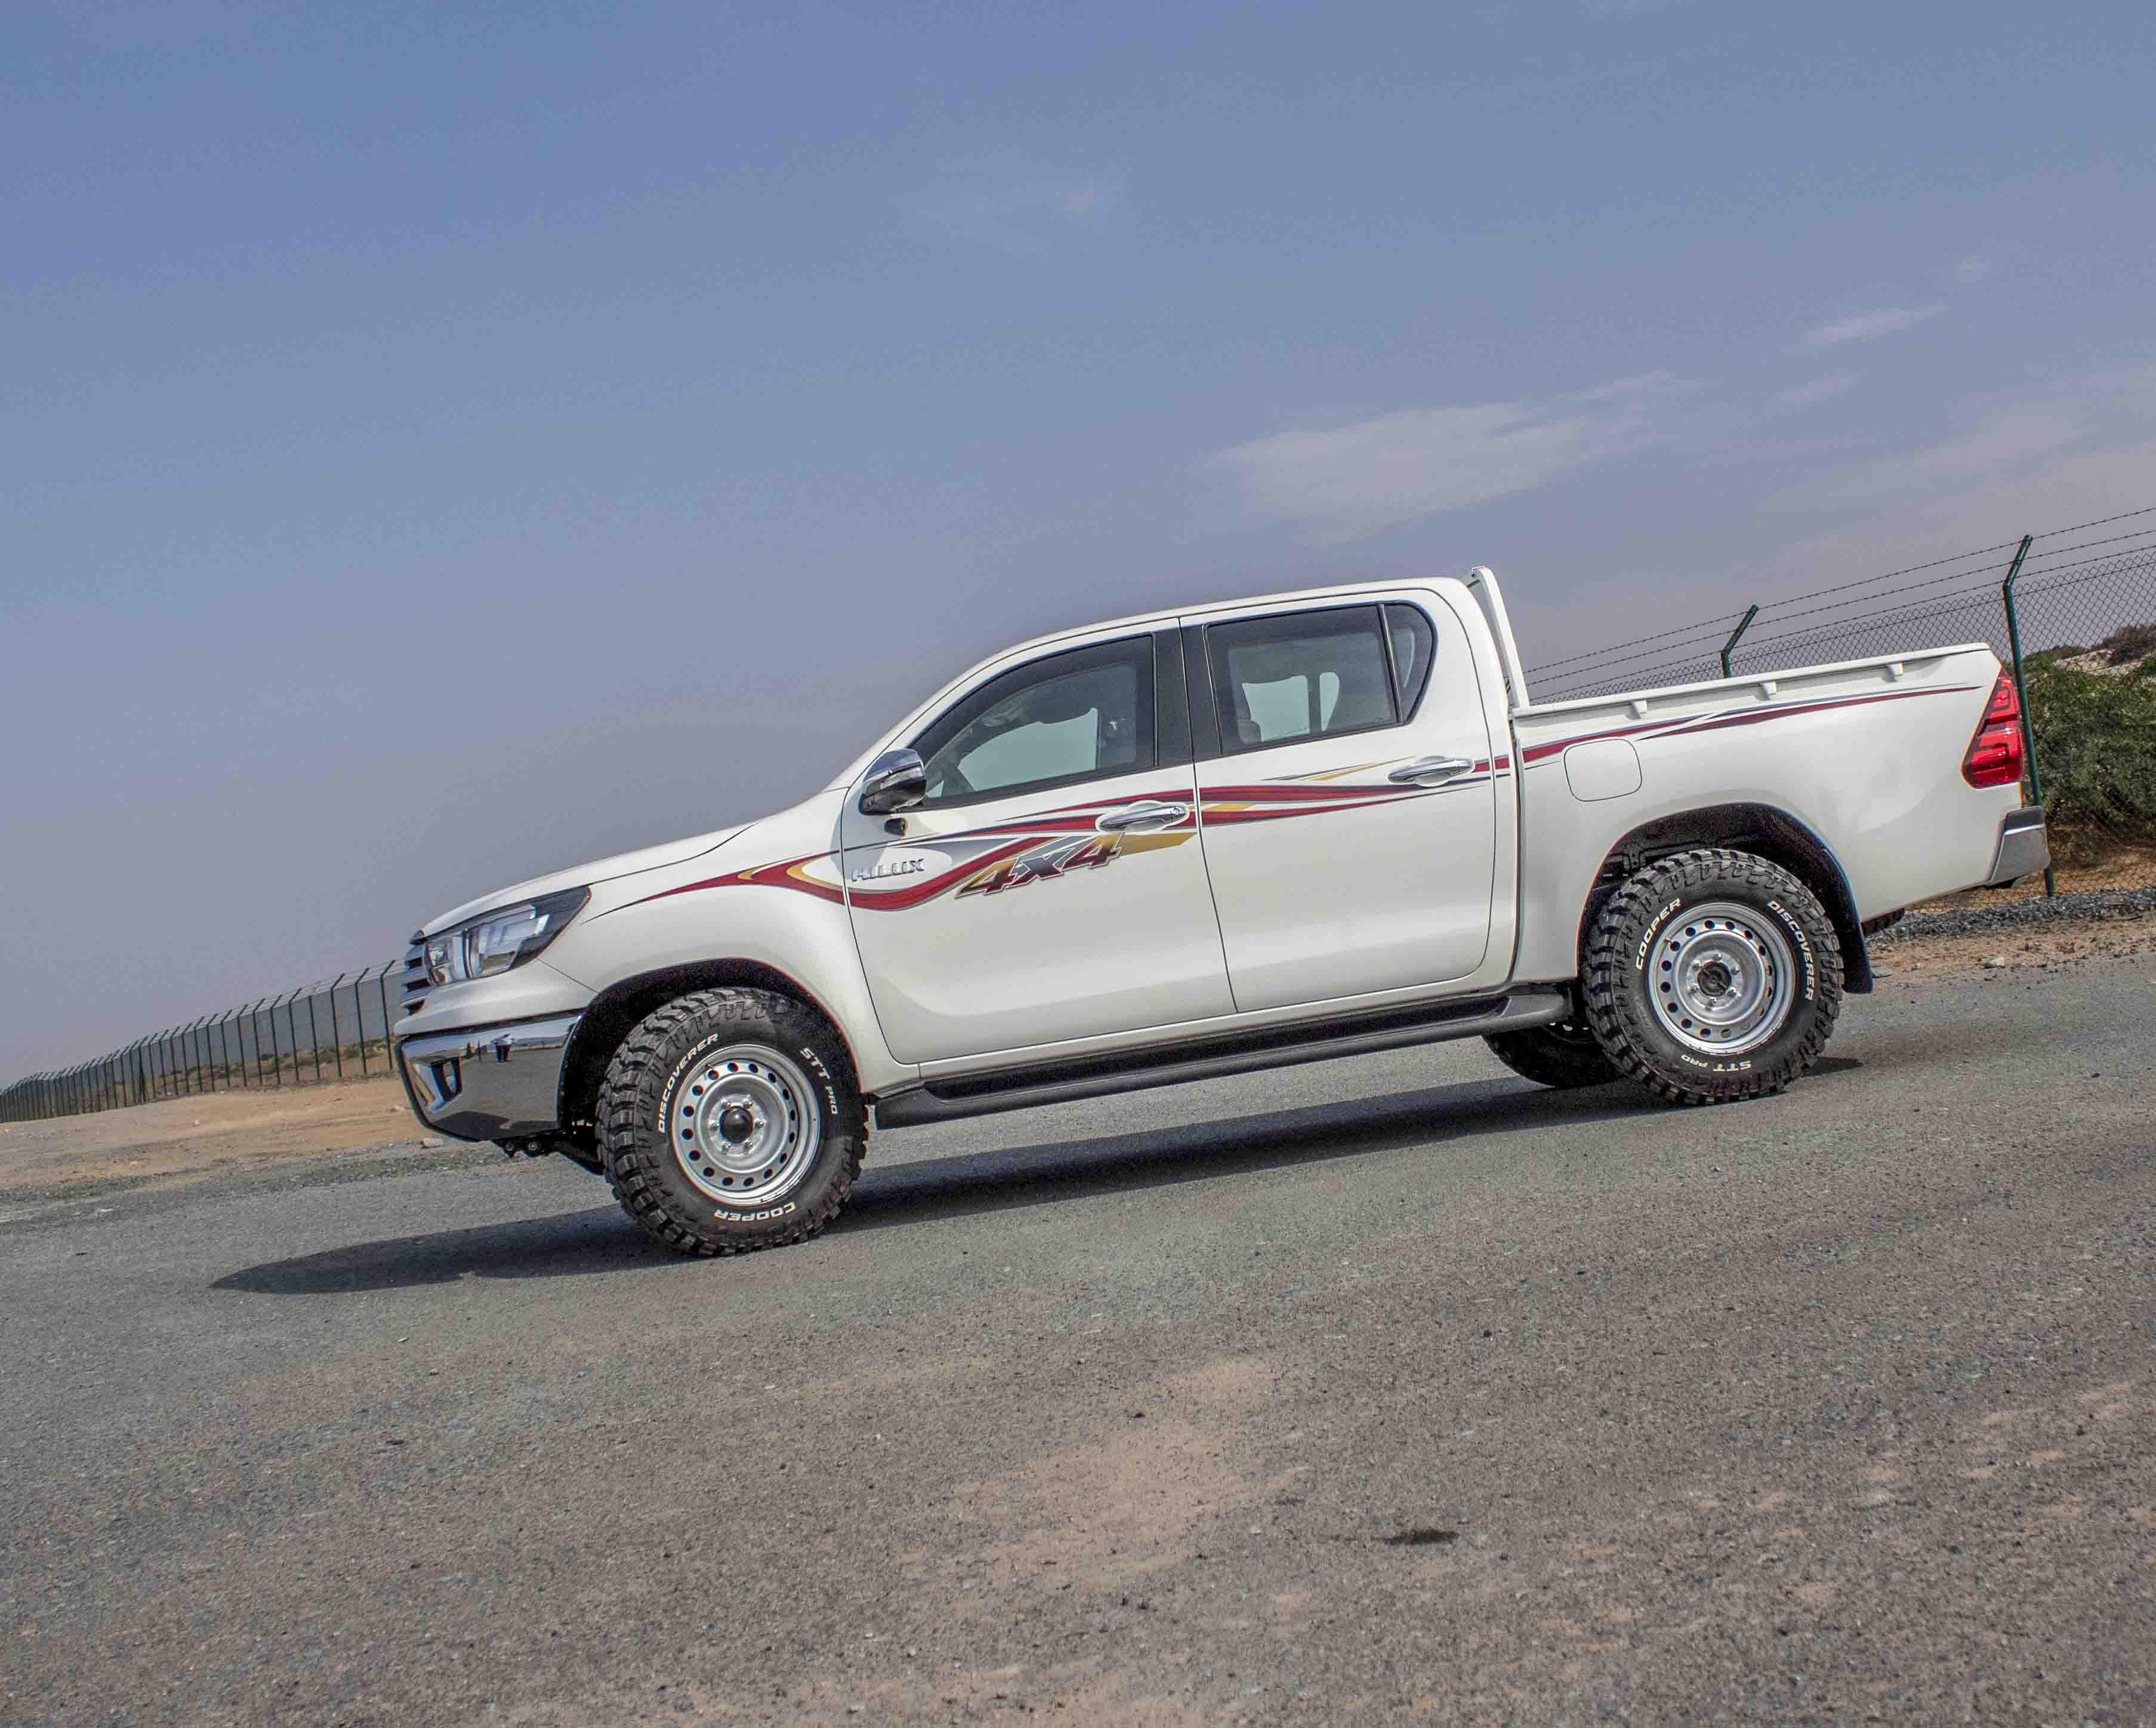        The Armoured Toyota Hilux Pick Up